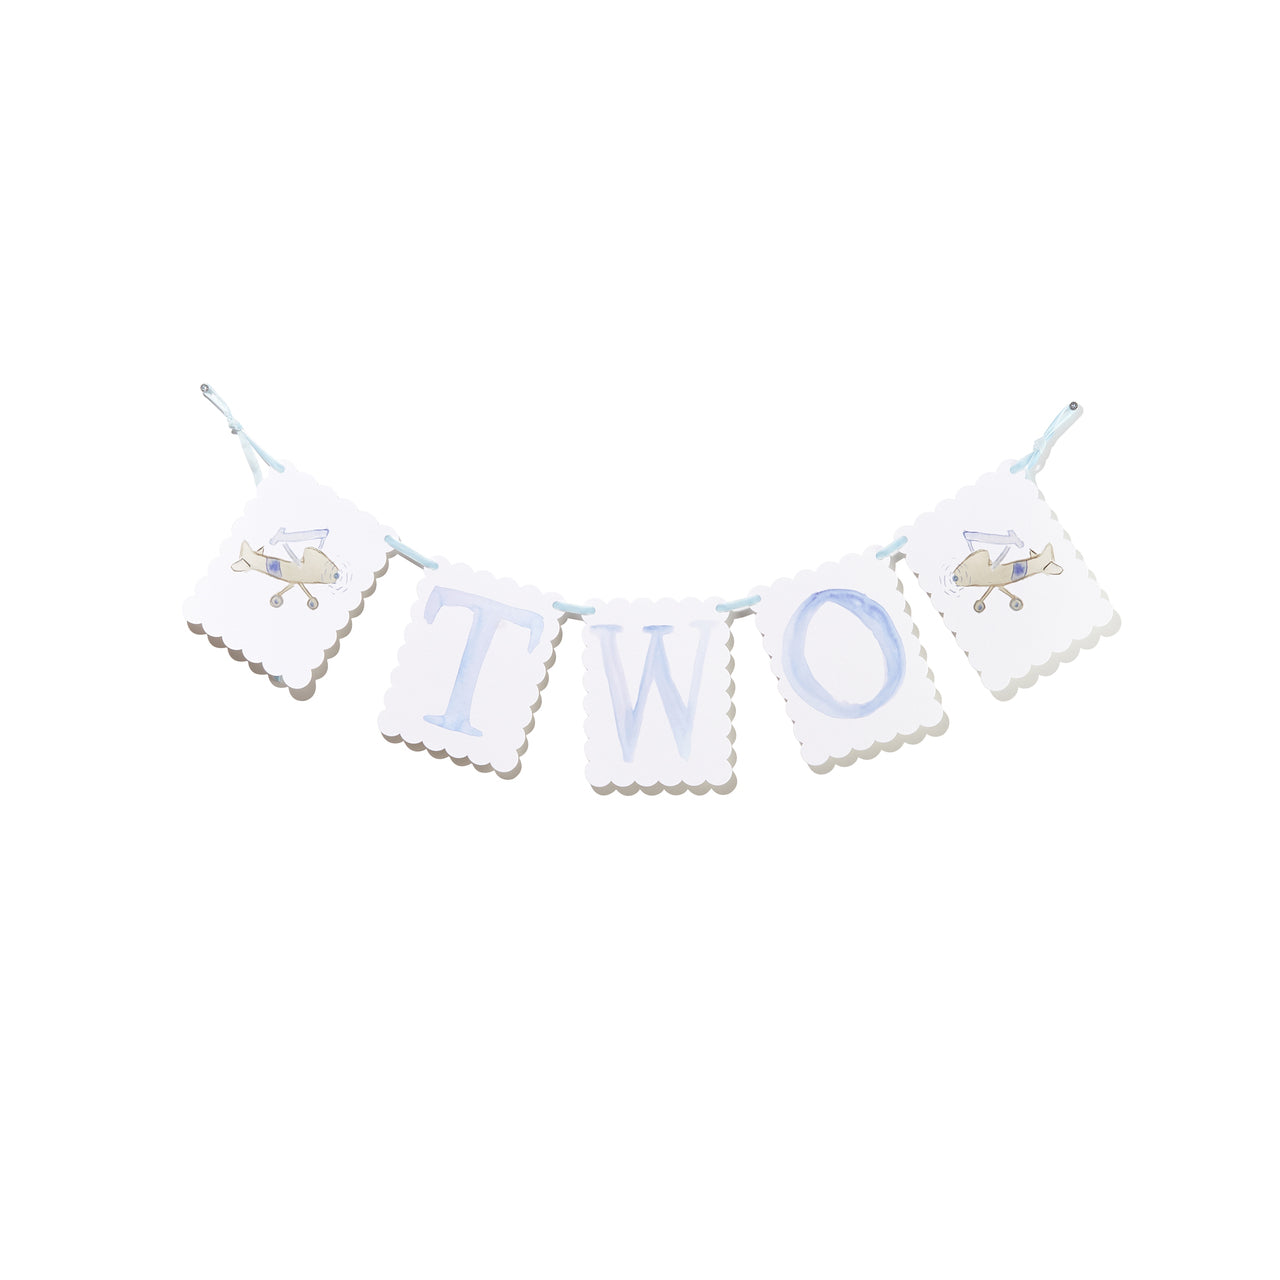 "TWO" Birthday Banner with Airplane/ Puppy Dog Endpieces